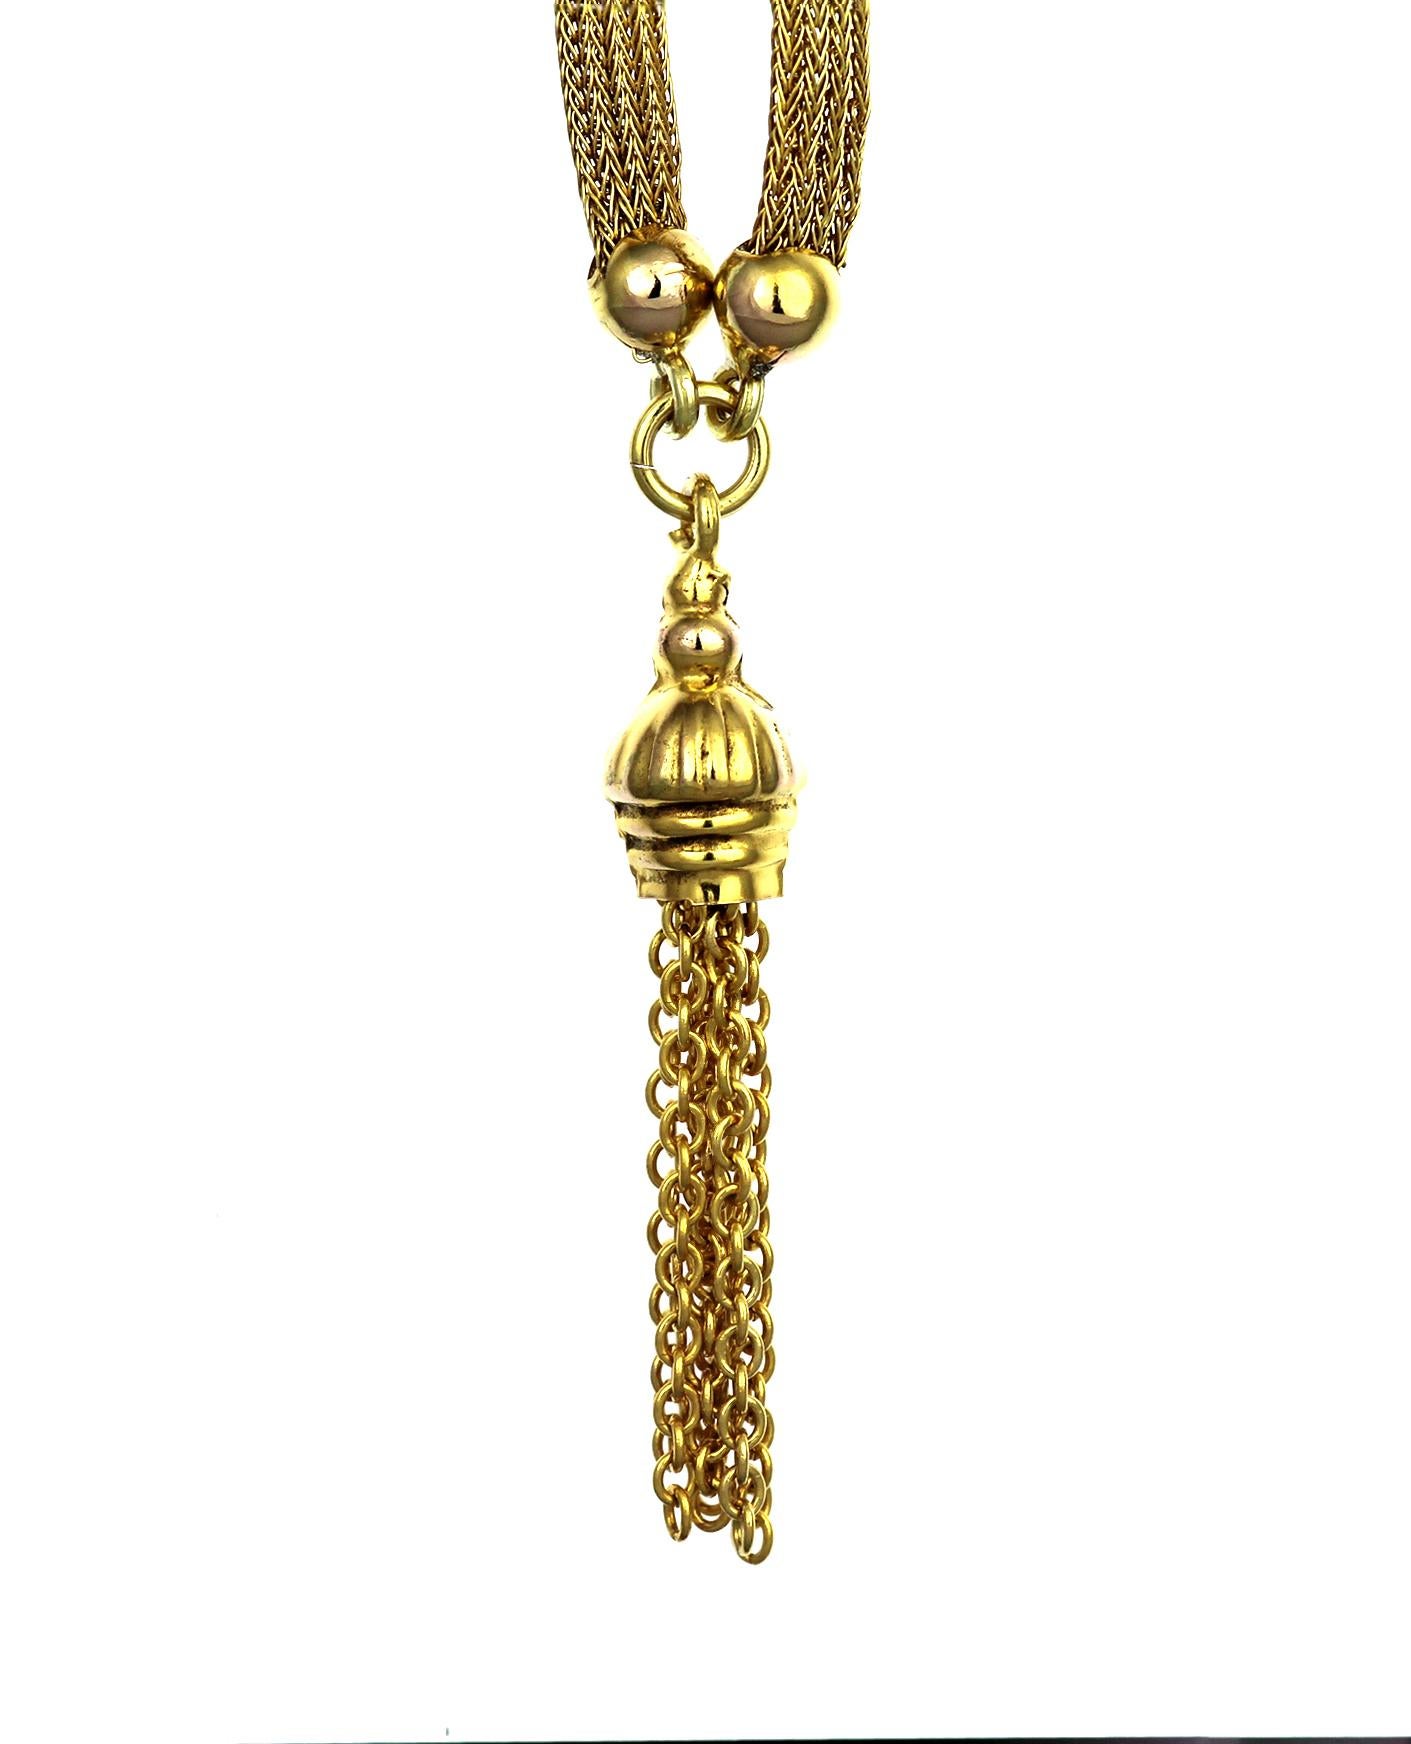 Antique 1880 12K Gold Long Chain/Necklace with Tassel Links with Enamel Panel For Sale 1